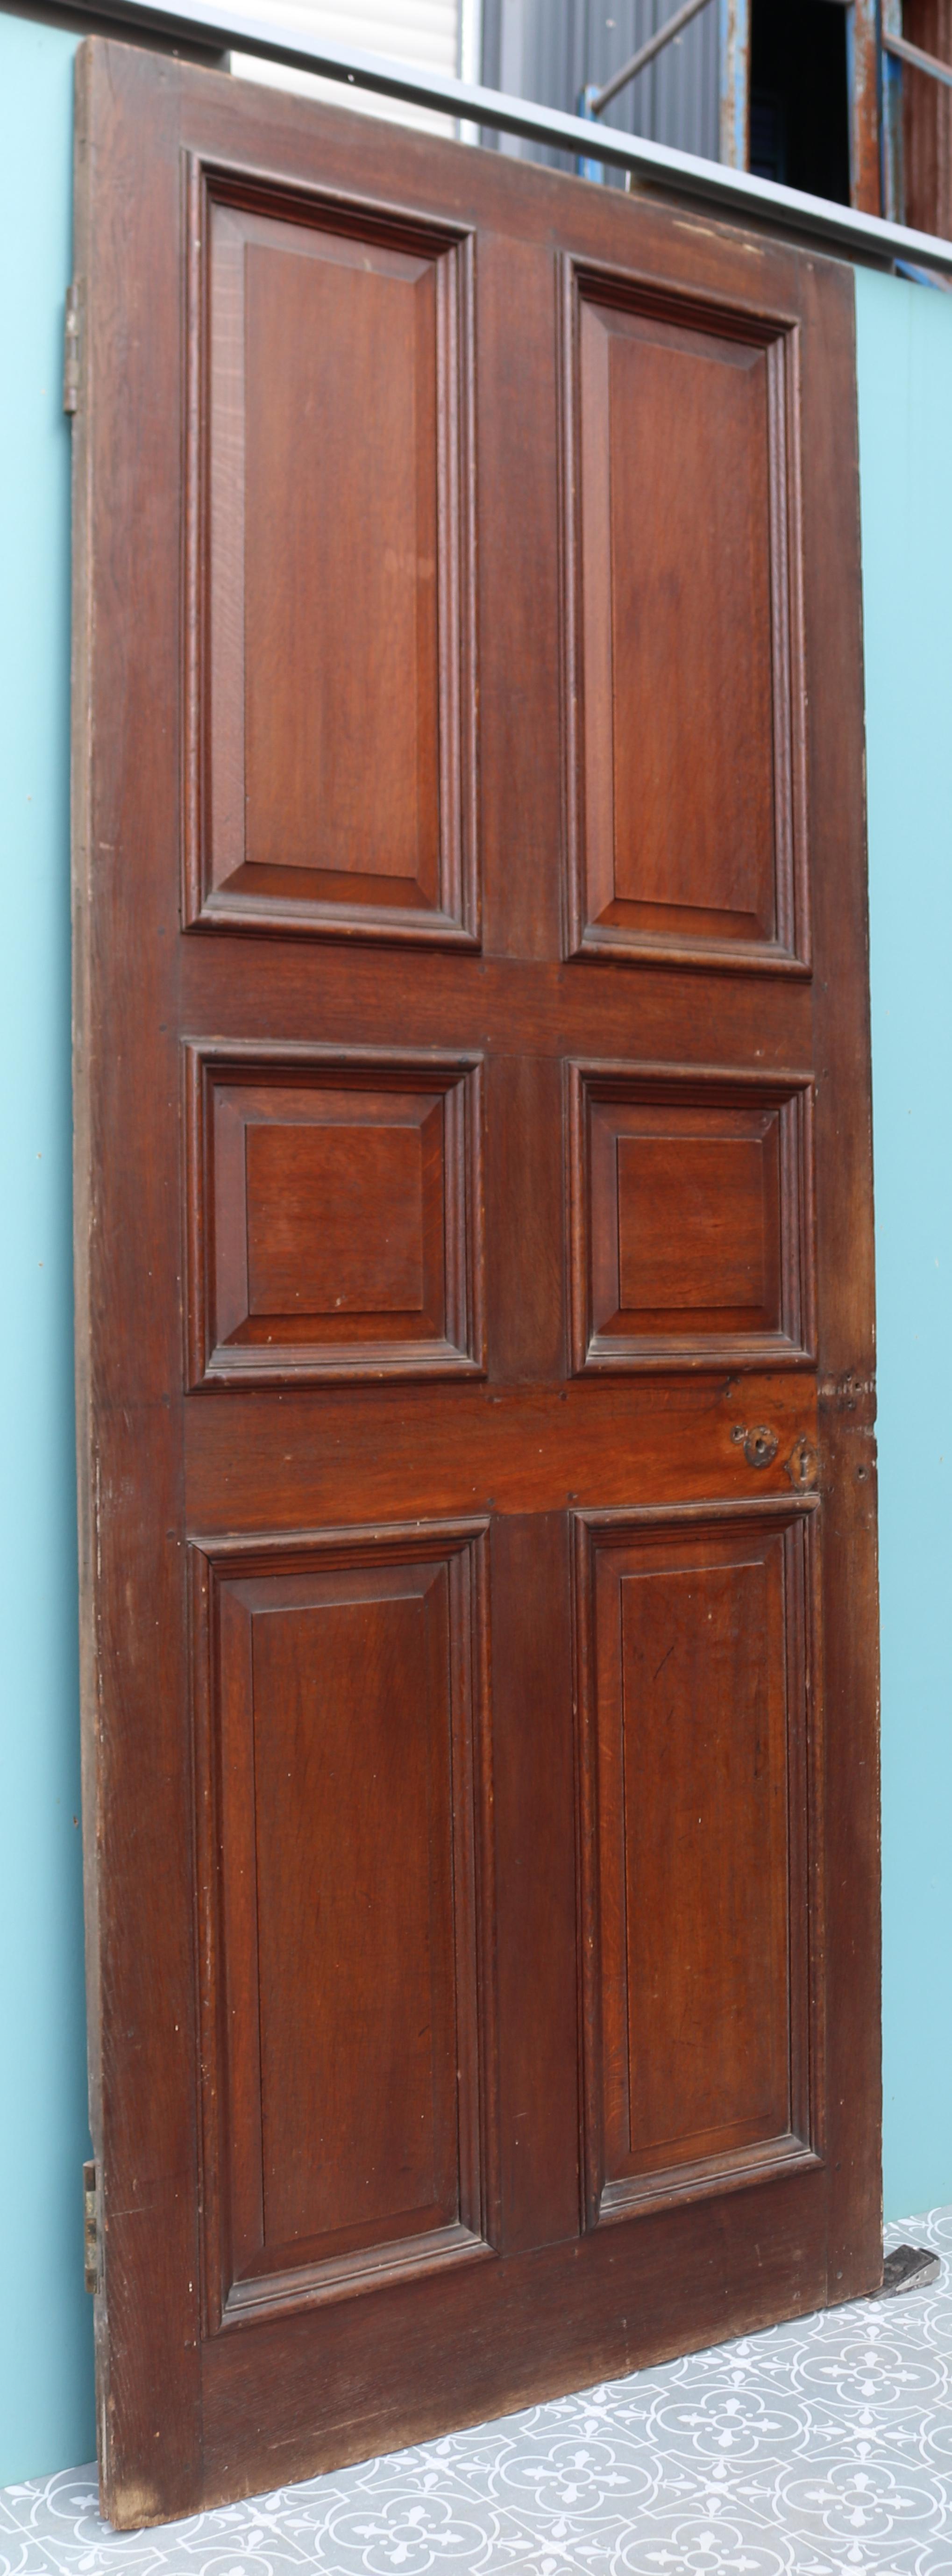 A good quality peg jointed door with raised and fielded panels. Salvaged from a property near Brighton. We currently have three similar doors and two panels available.